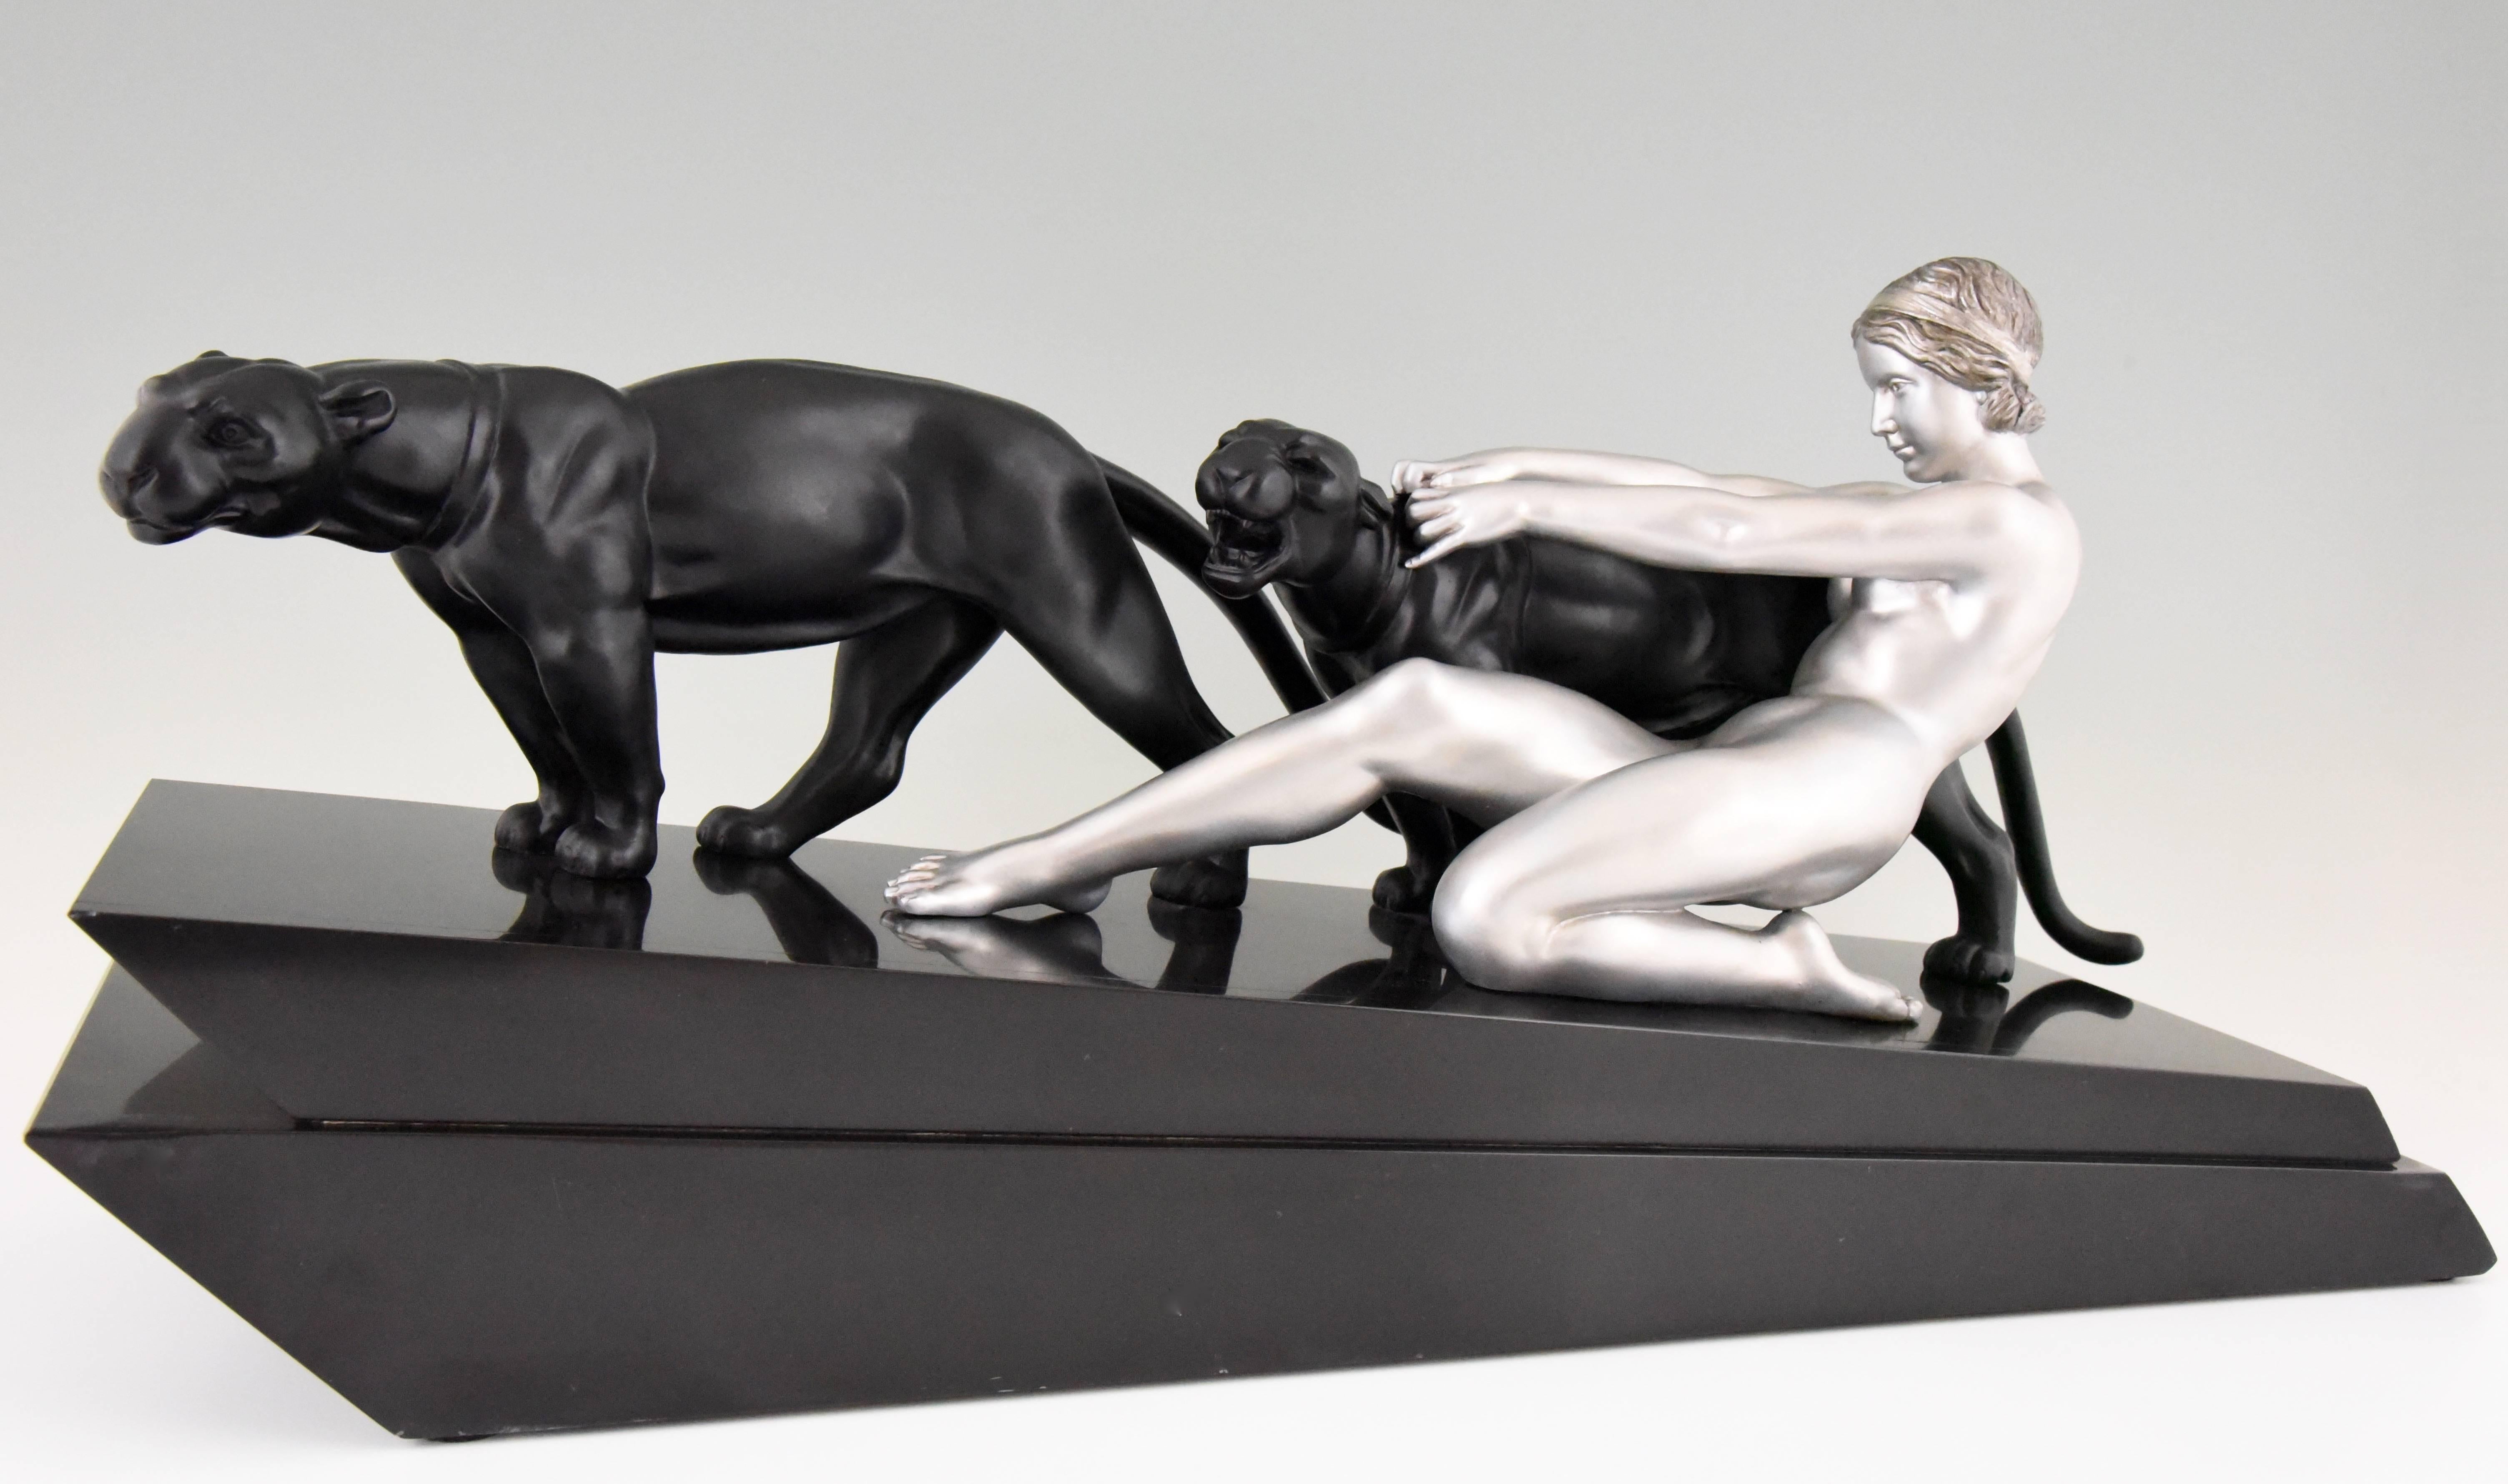 Impressive Art Deco sculpture of a nude with two black panthers on Belgian black marble base by the French artist Alexandre Ouline, who worked in France, 1918-1940.
Artist/ Maker: Alexandre Ouline
Signature/ marks: Ouline
Style: Art Deco
Date: